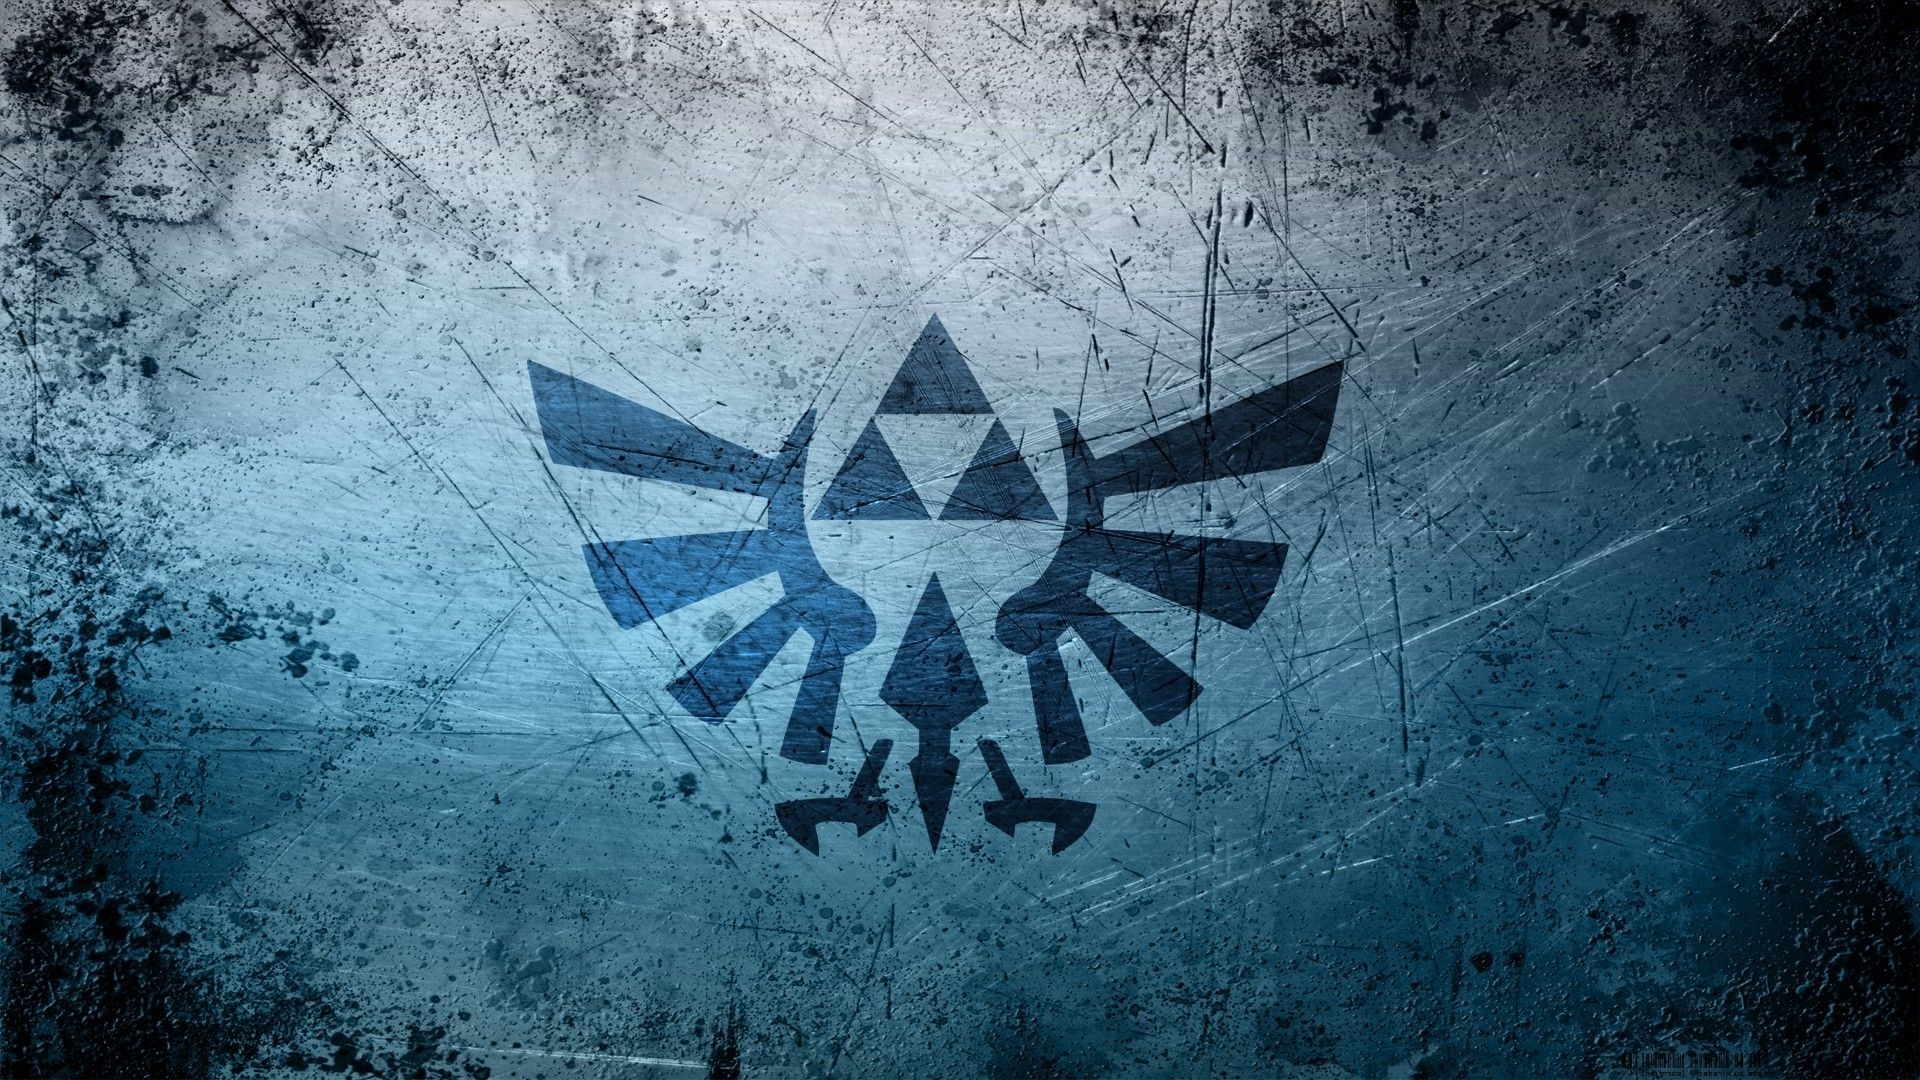 10 Top Legend Of Zelda Wallpapers Hd FULL HD 1920×1080 For PC Background